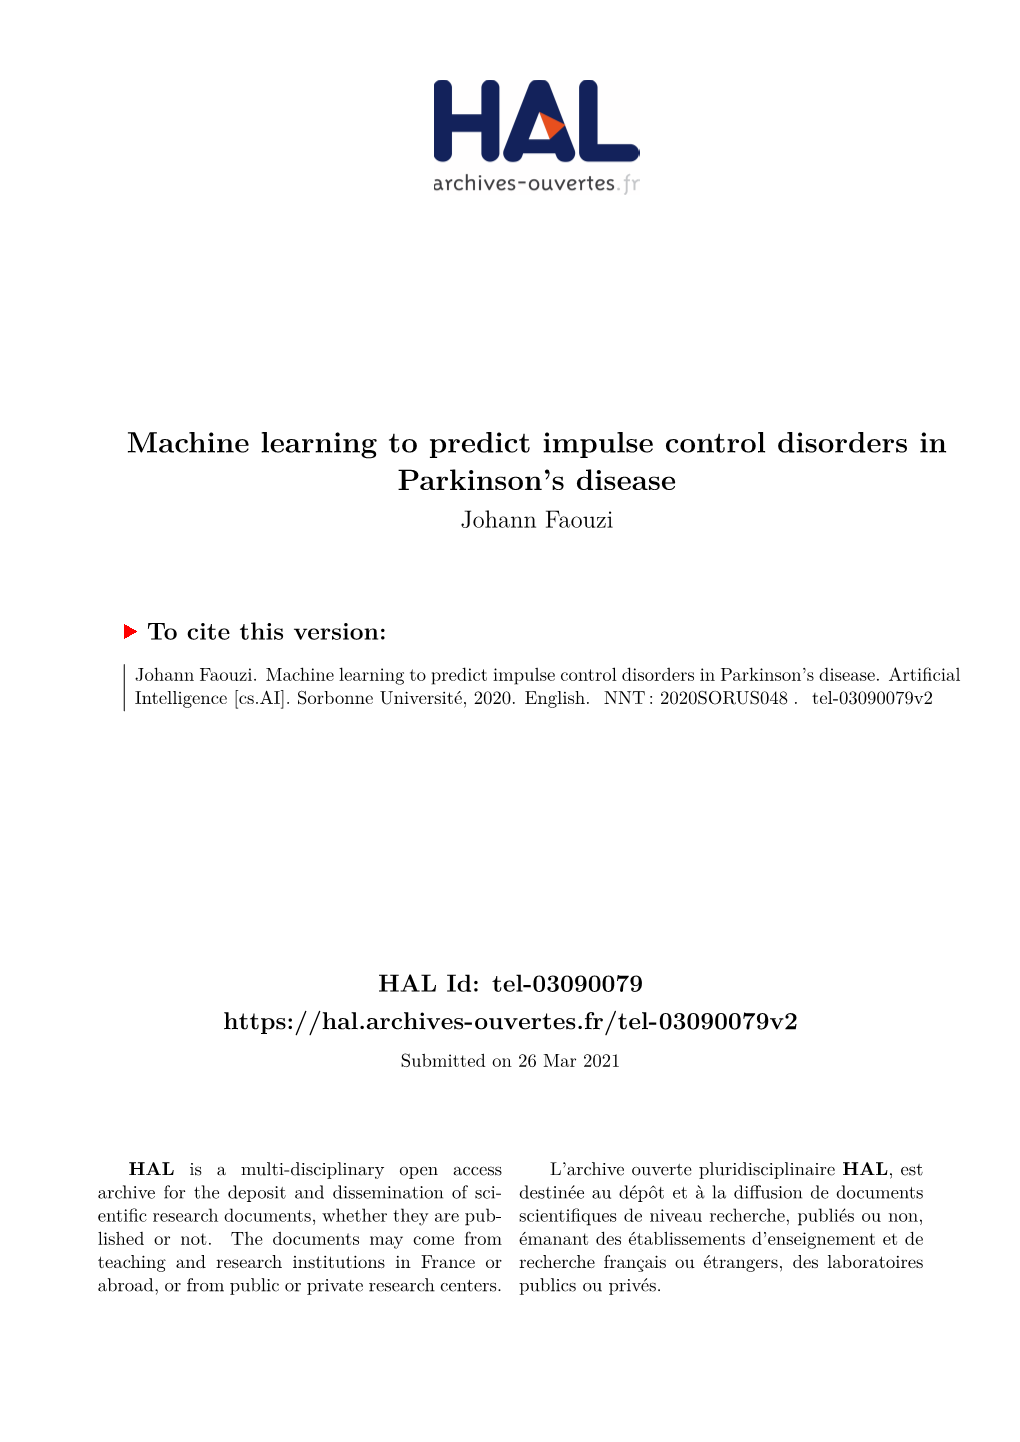 Machine Learning to Predict Impulse Control Disorders in Parkinson's